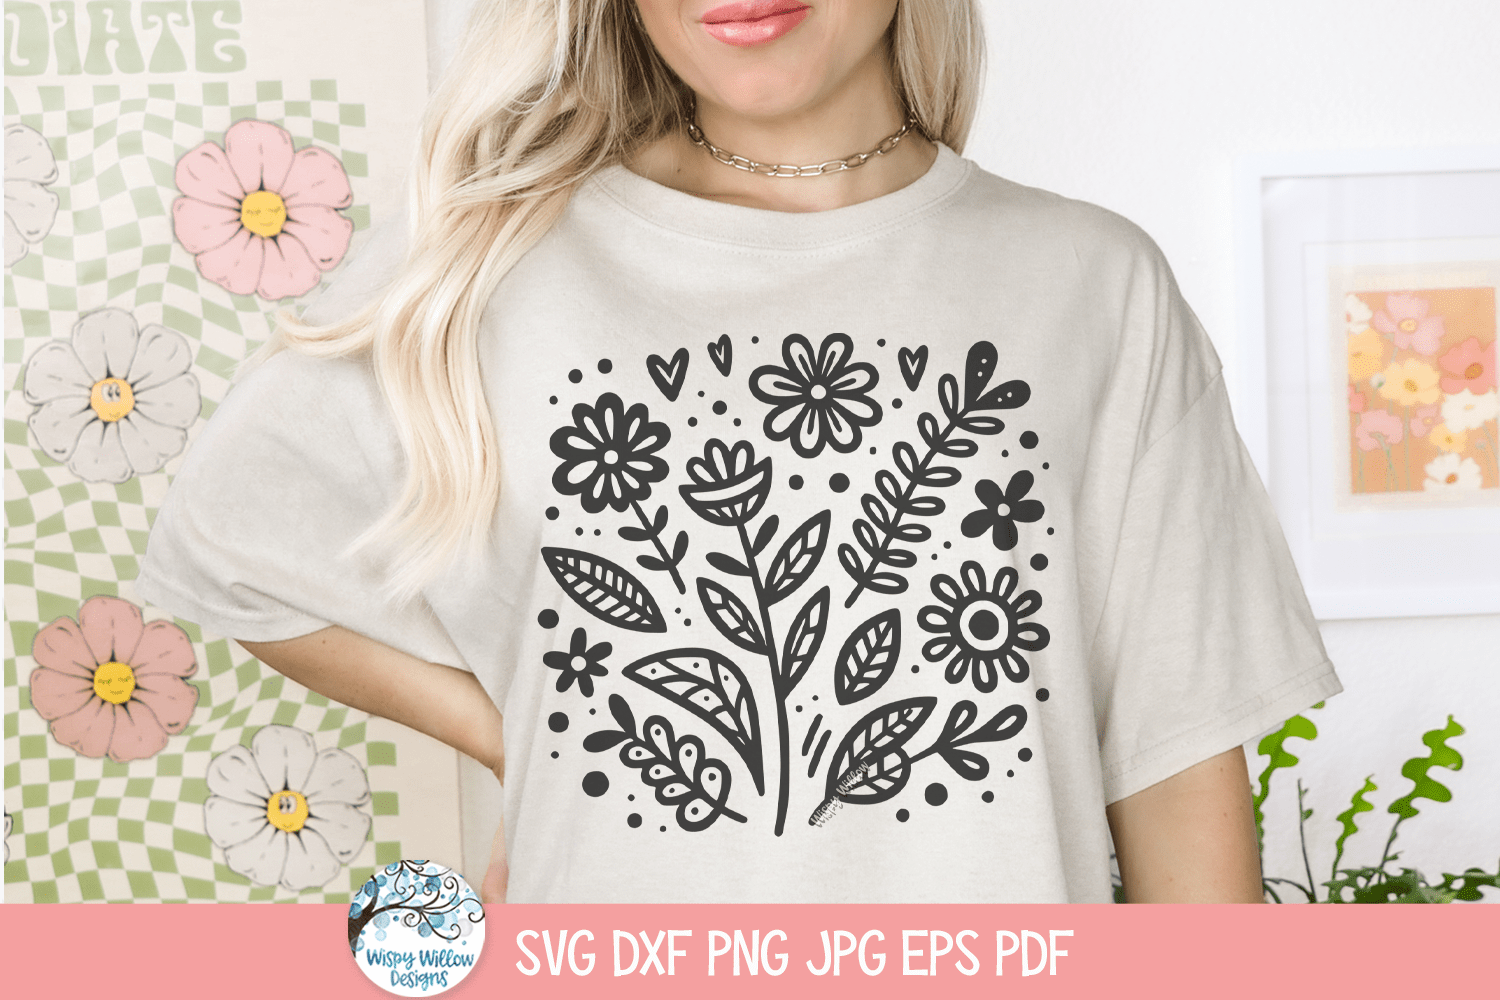 Copy of Flowers SVG | Hand-Drawn Flowers Tee Wispy Willow Designs Company